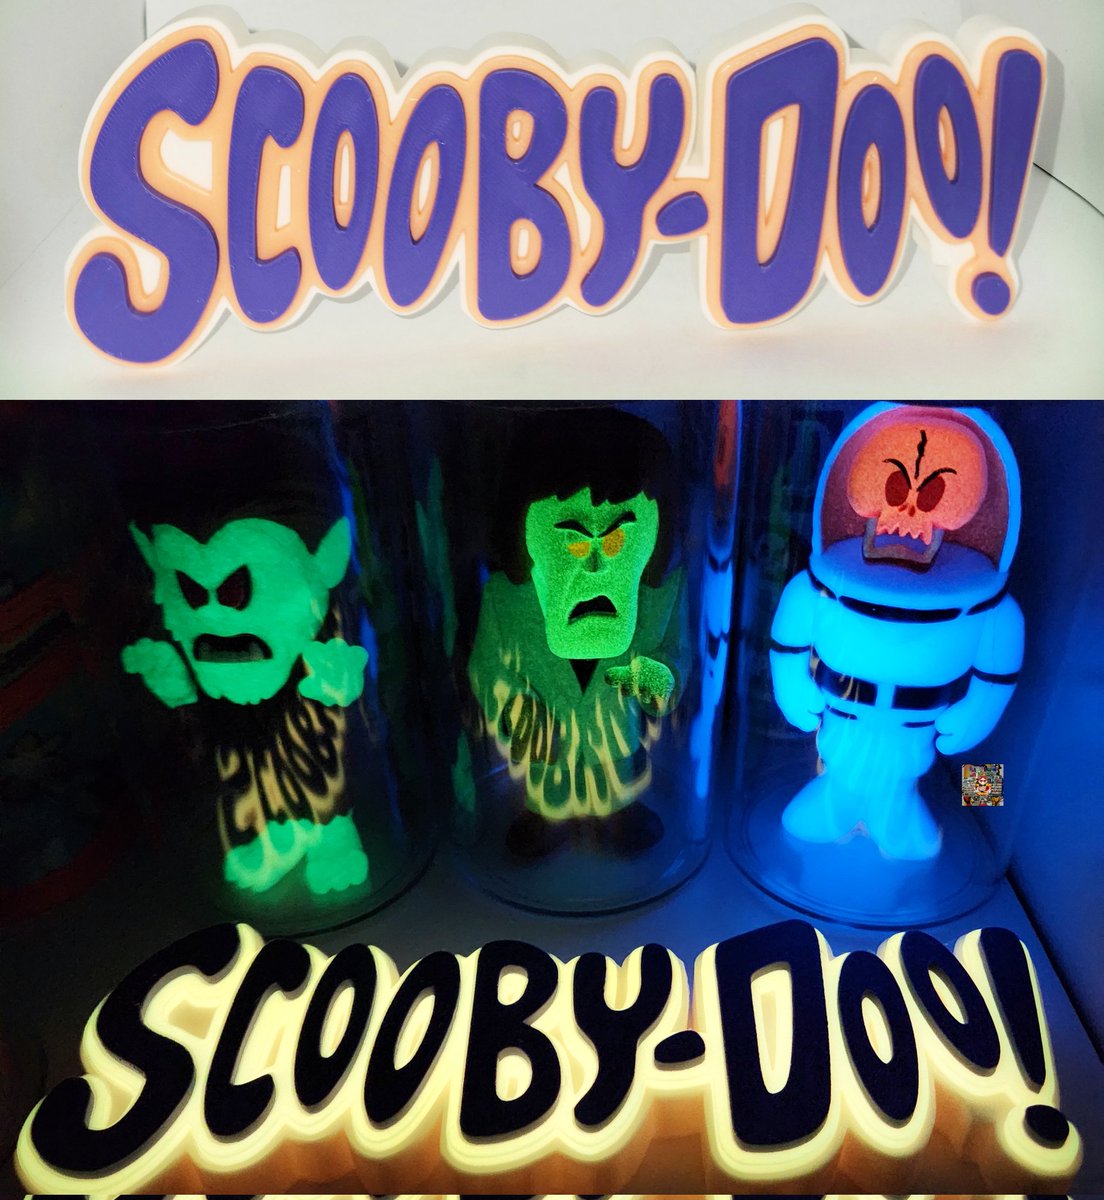 #FunkoFamily Friday Mail Call😱🤩 The most heartfelt thank you to a community member we could only be so lucky to have, @DarthFreddySE! Just a first mess around(this will be overused🤣)& glow is🔥🤯🔥!! No words describe our gratitude🙏 Appreciate this greatly~love it! #ScoobyDoo